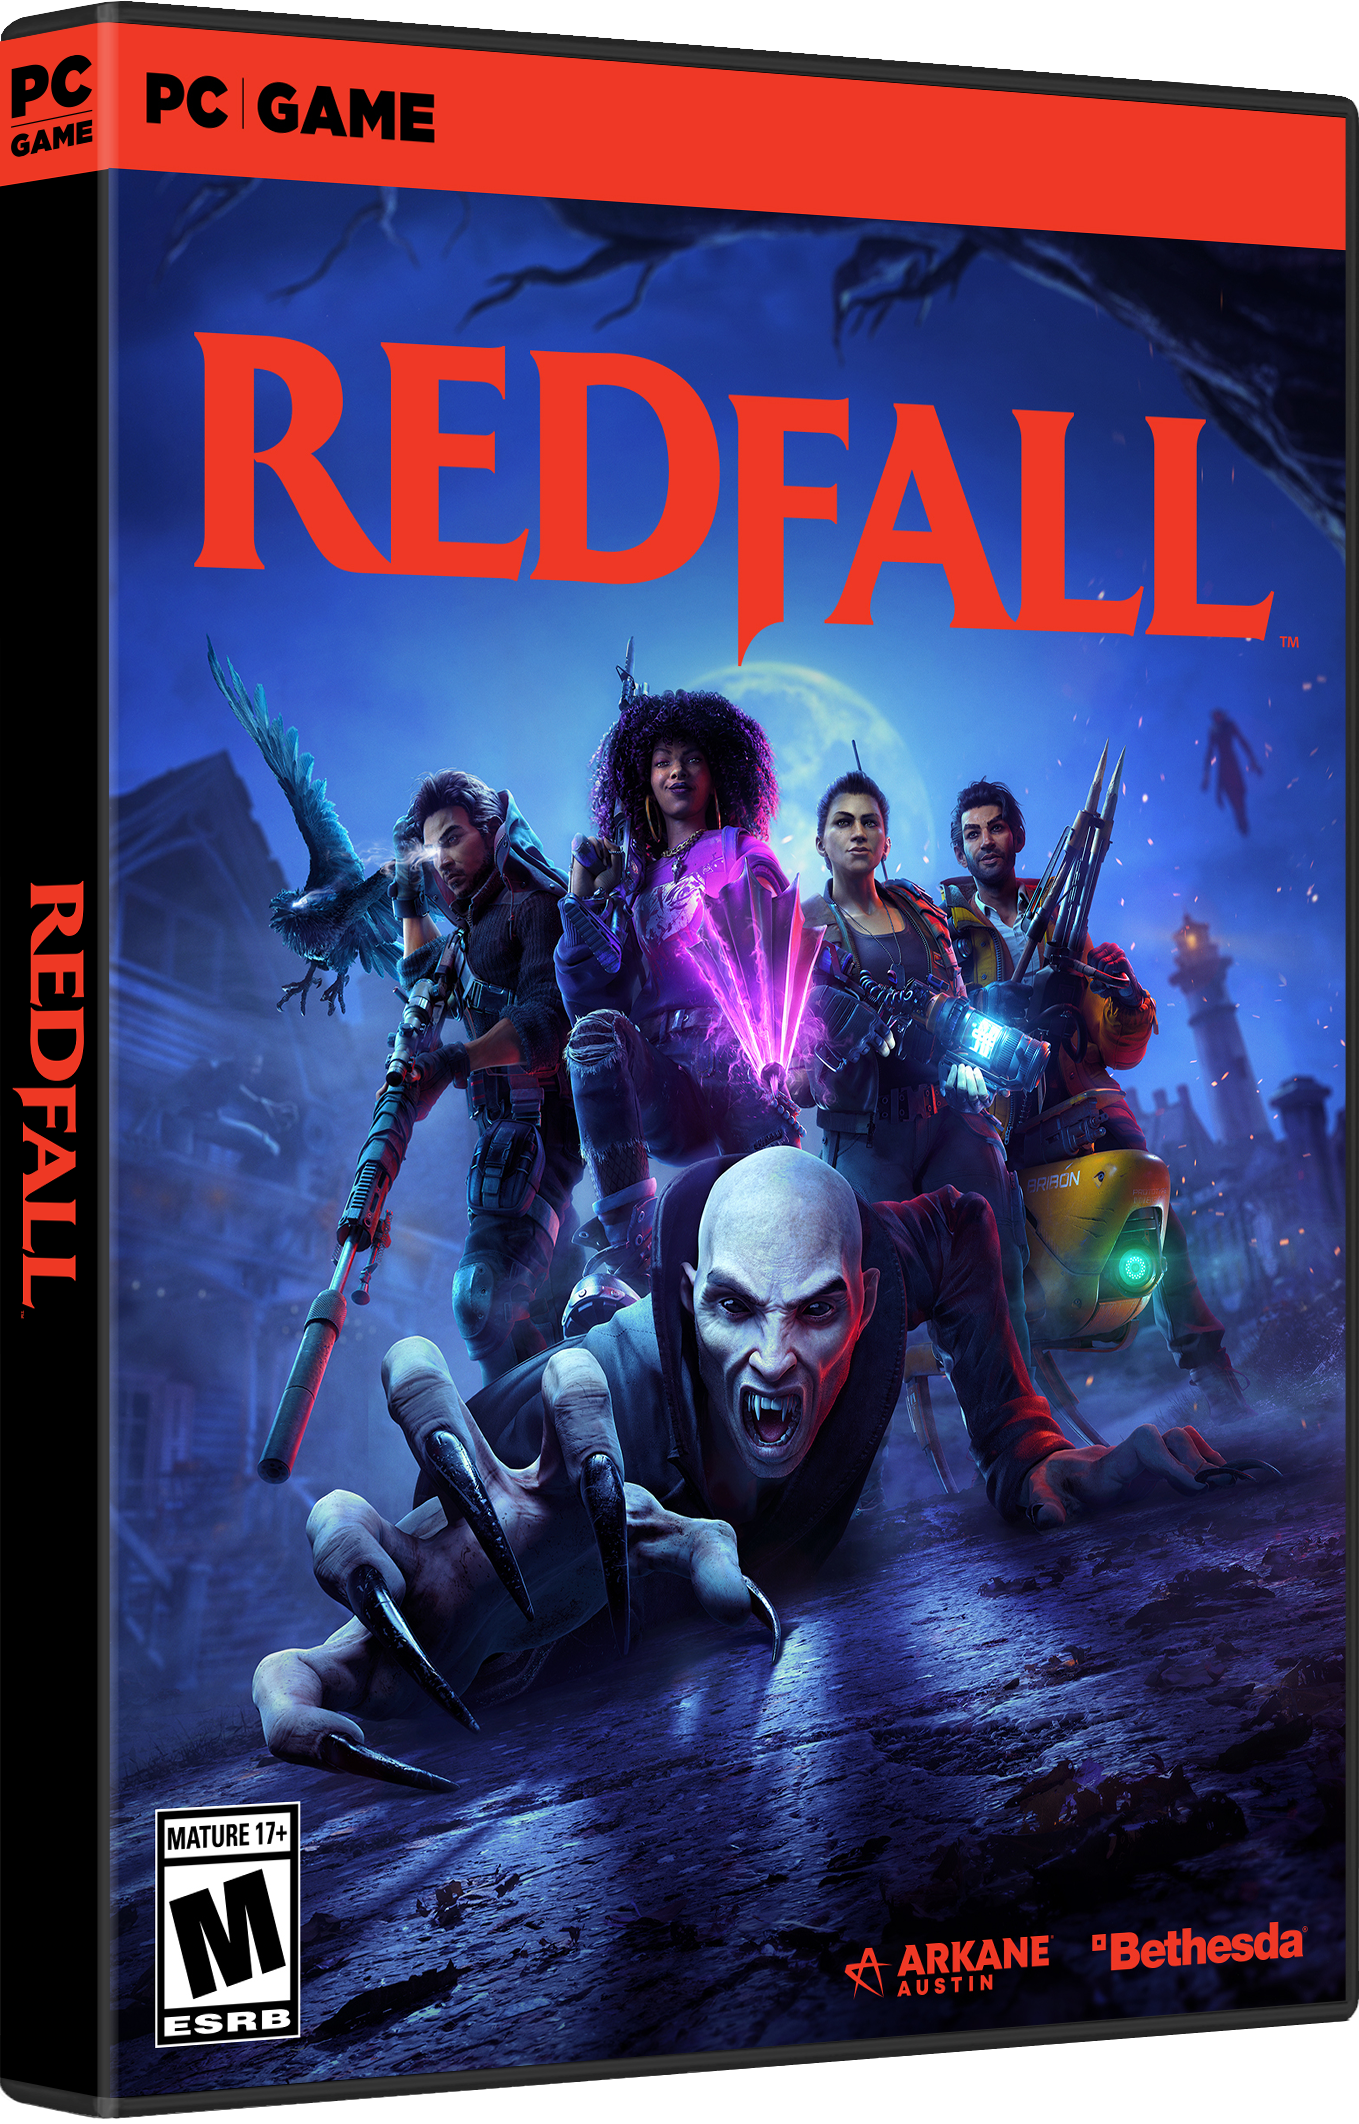 I tried to play Redfall after the update 